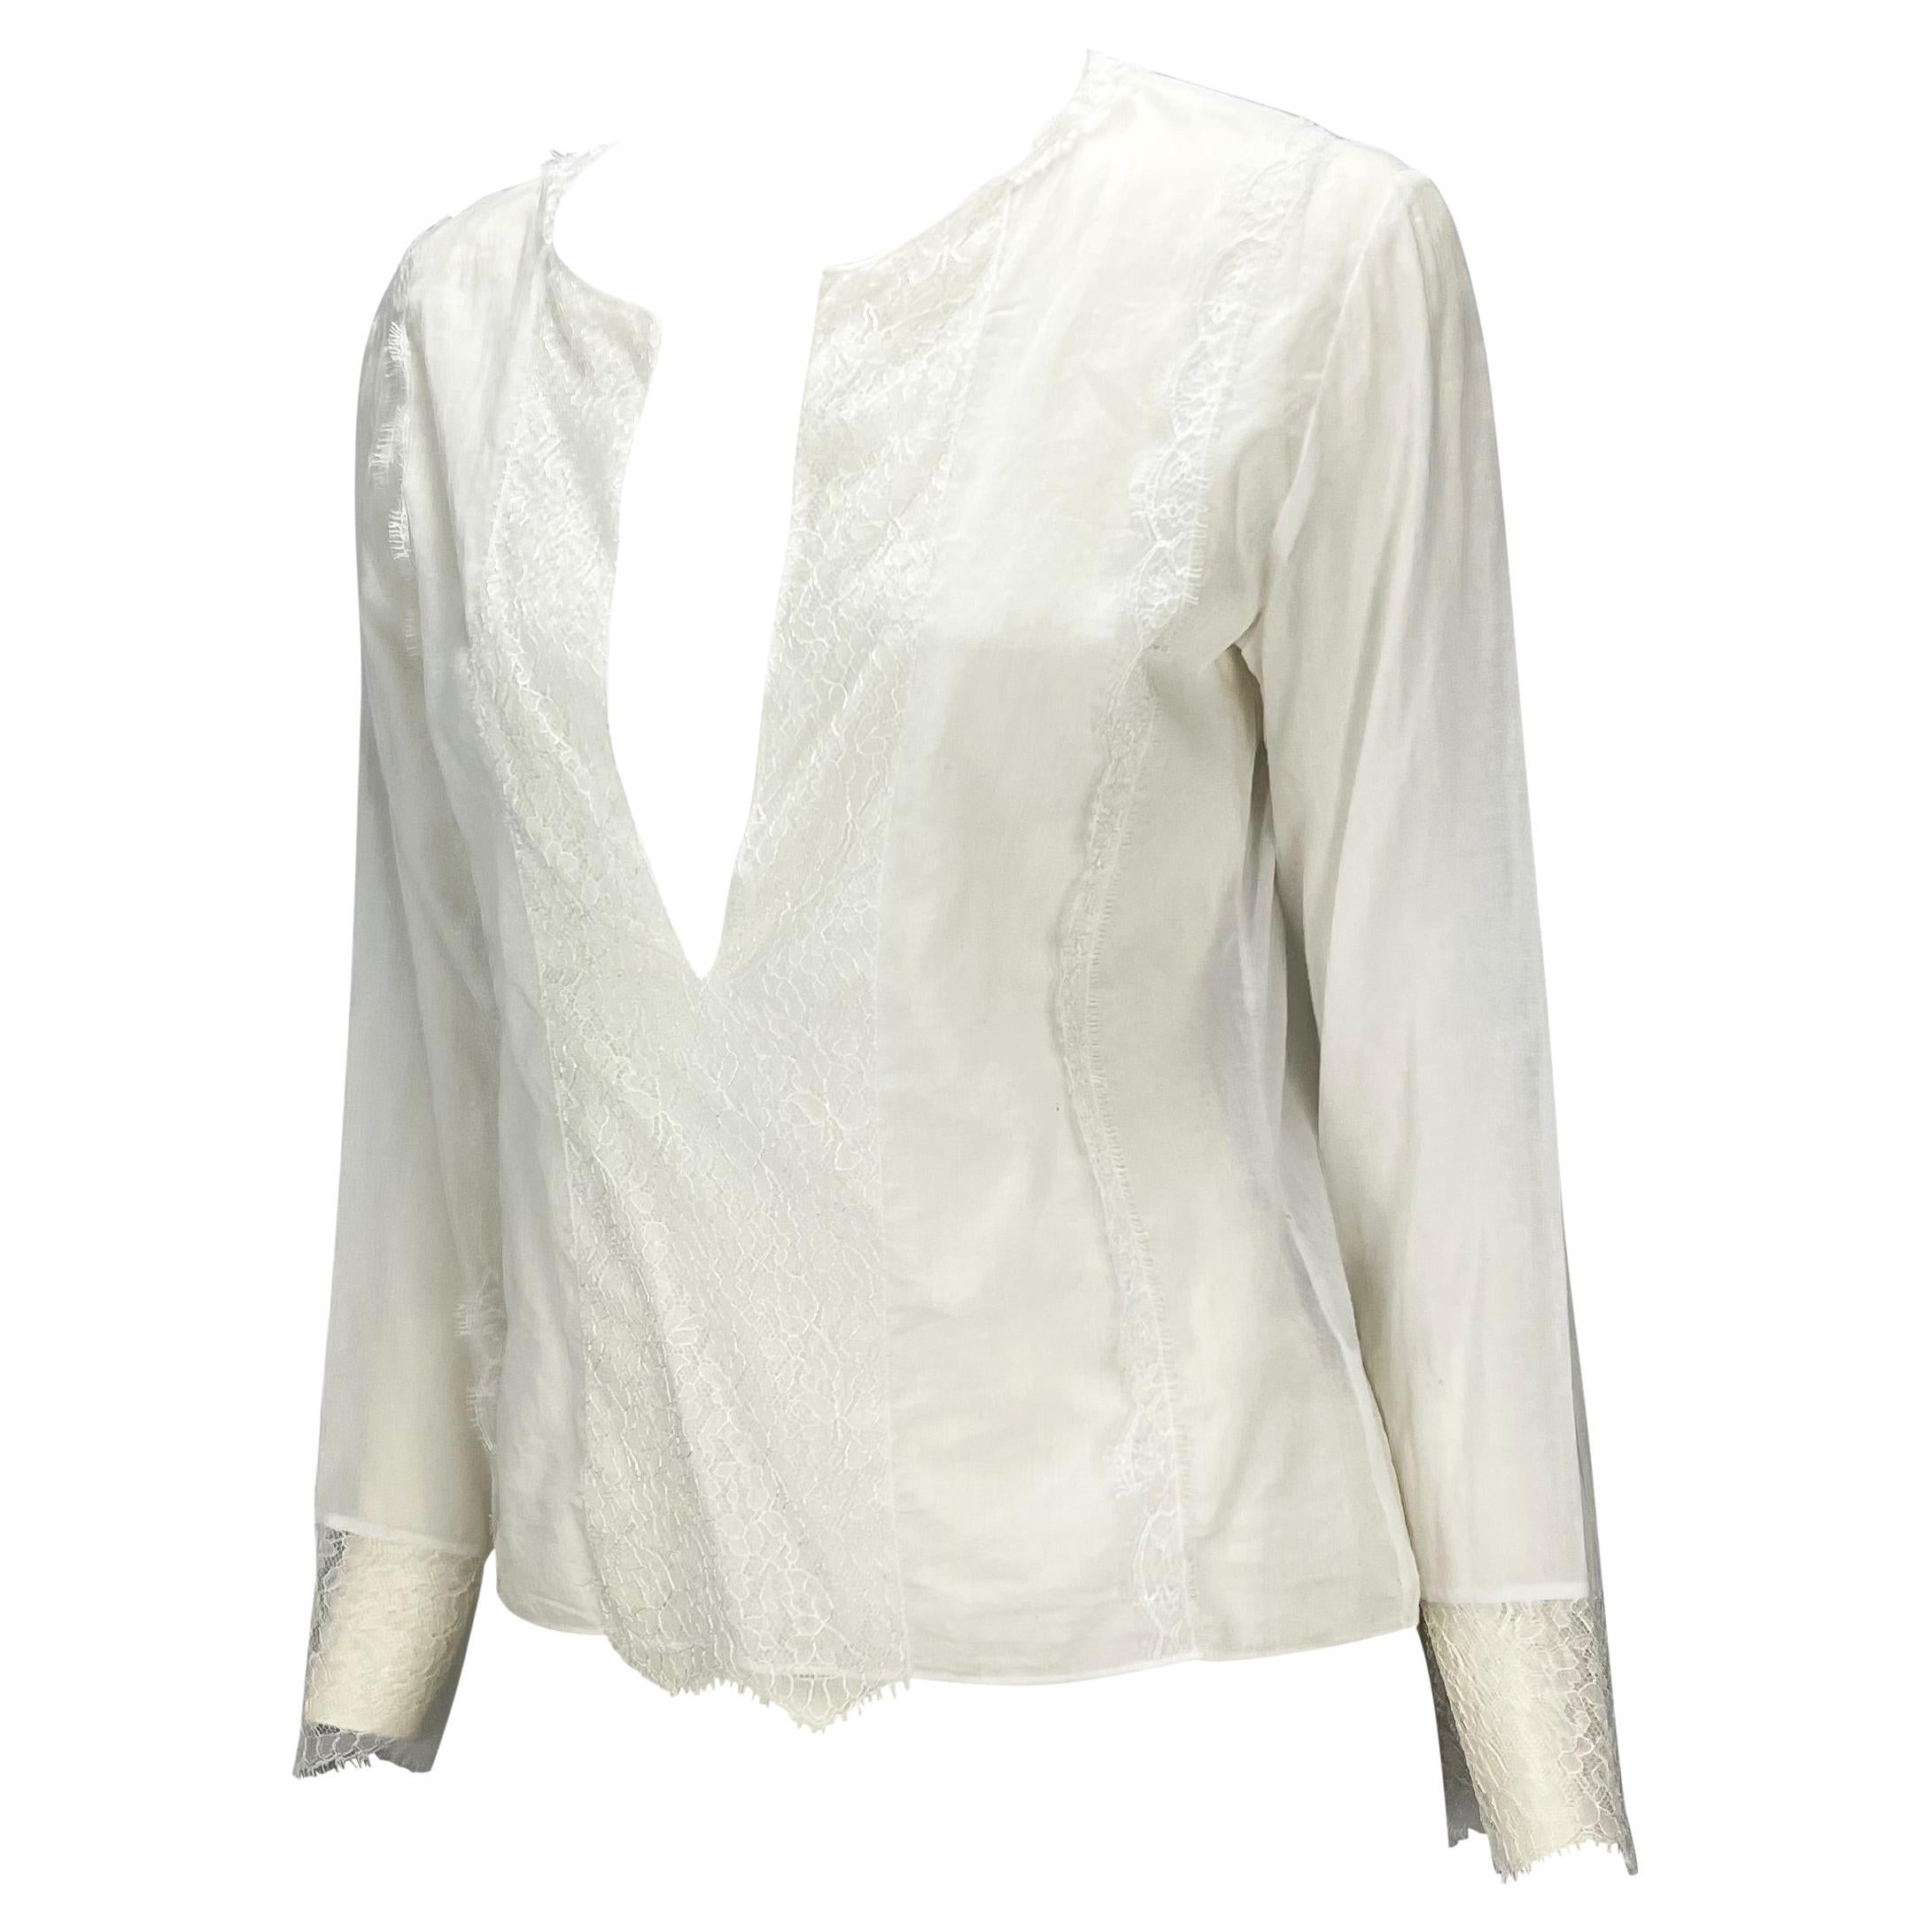 Presenting a gorgeous semi-sheer lace Gucci blouse, designed by Tom Ford. From the Spring/Summer 2000 collection, this free-flowing blouse is constructed of light cotton and lace. The top features a plunging neckline with a lace panel down the